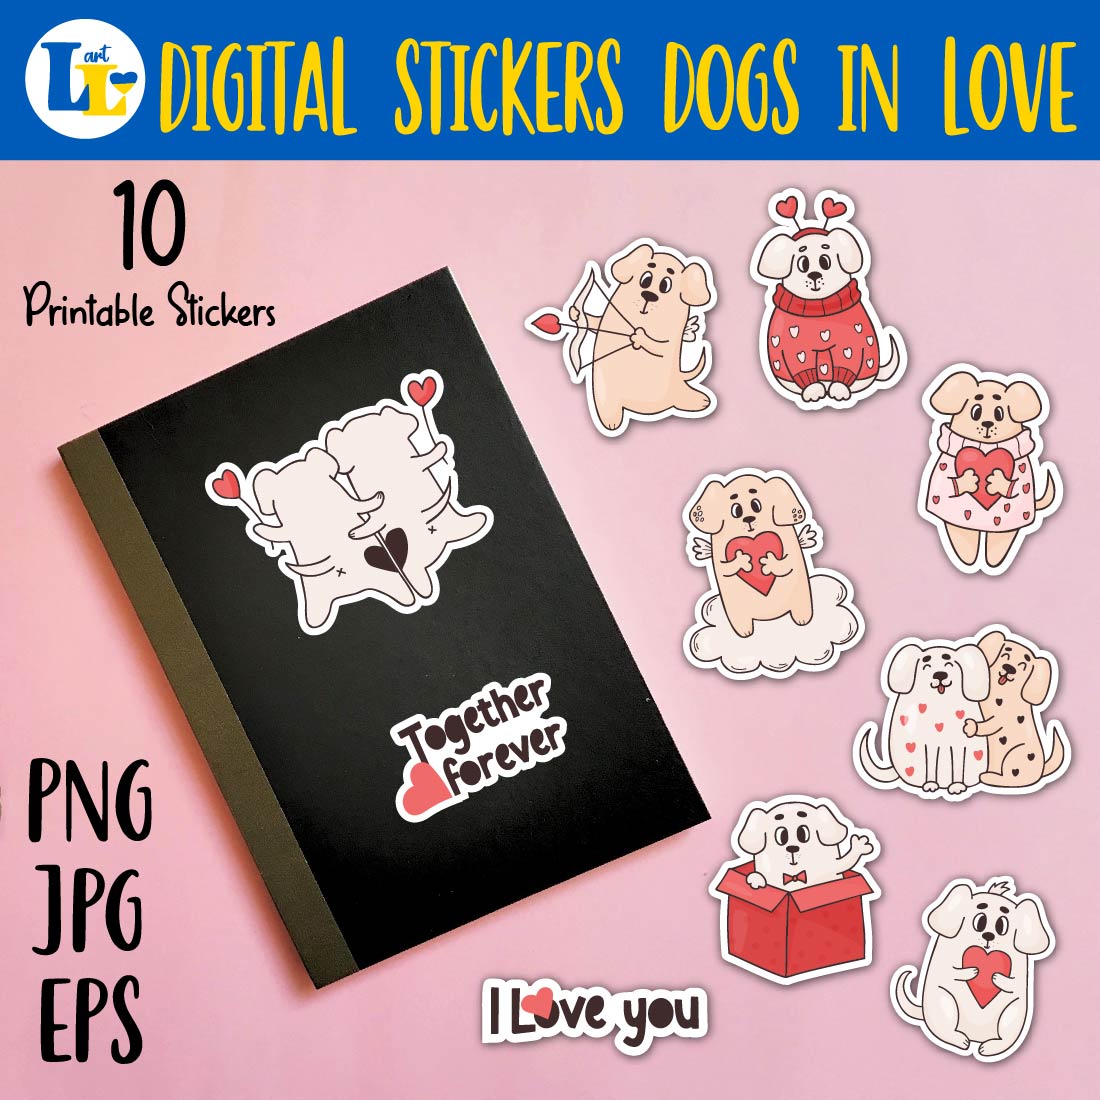 A pack of images of wonderful stickers with a cute dog